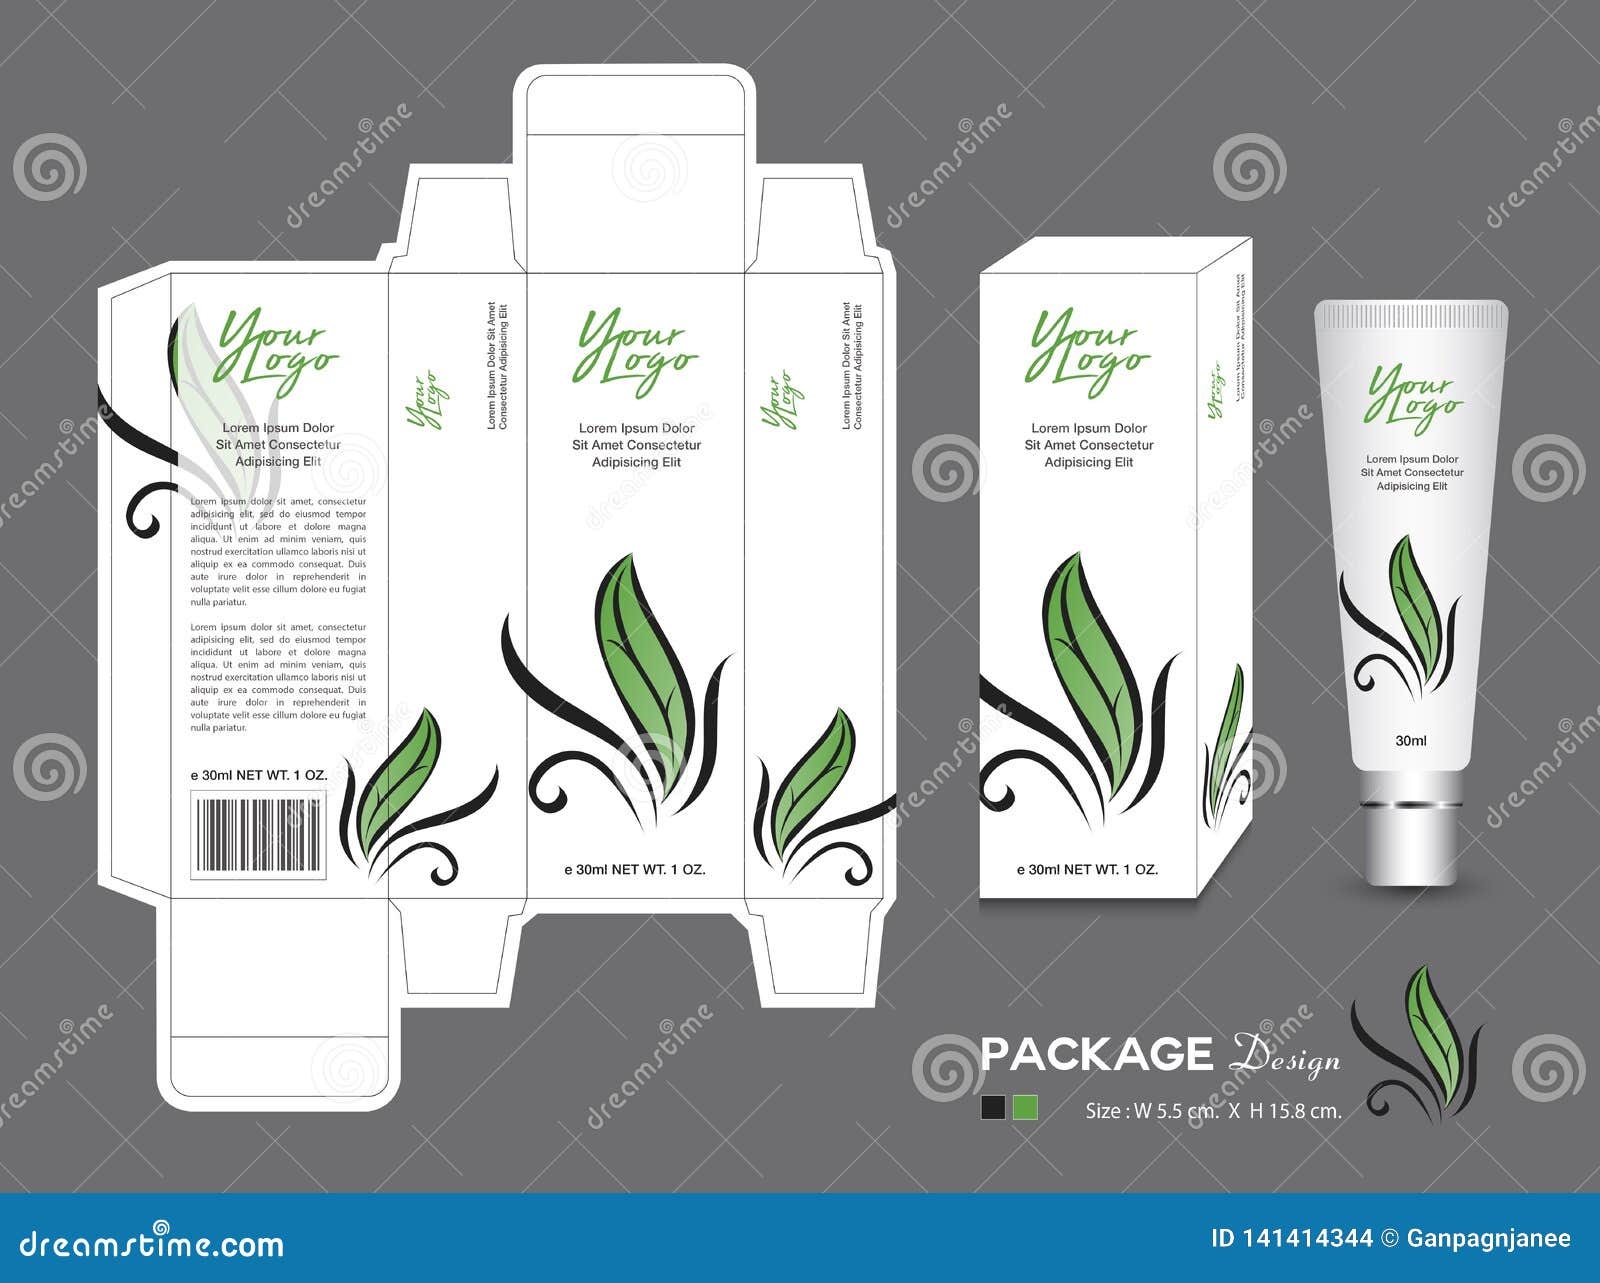 Packaging Template, 3d Box Cosmetics, Product Design, Leaf Packaging, Healthy Products, Cream Layout, Care Stock Vector - of leaf, lotion: 141414344